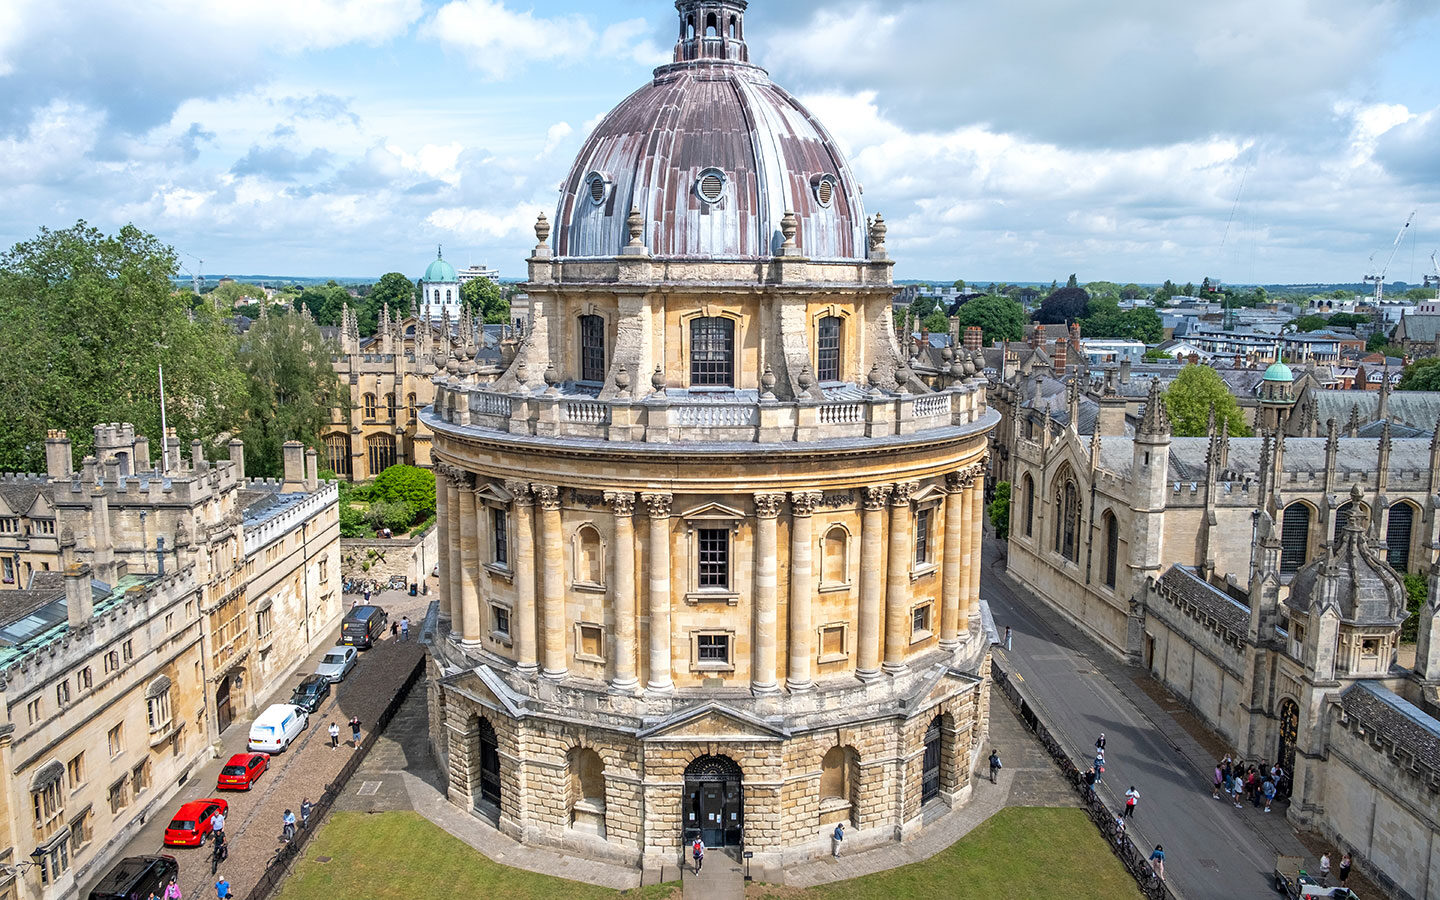 The Radcliffe Camera in Oxford